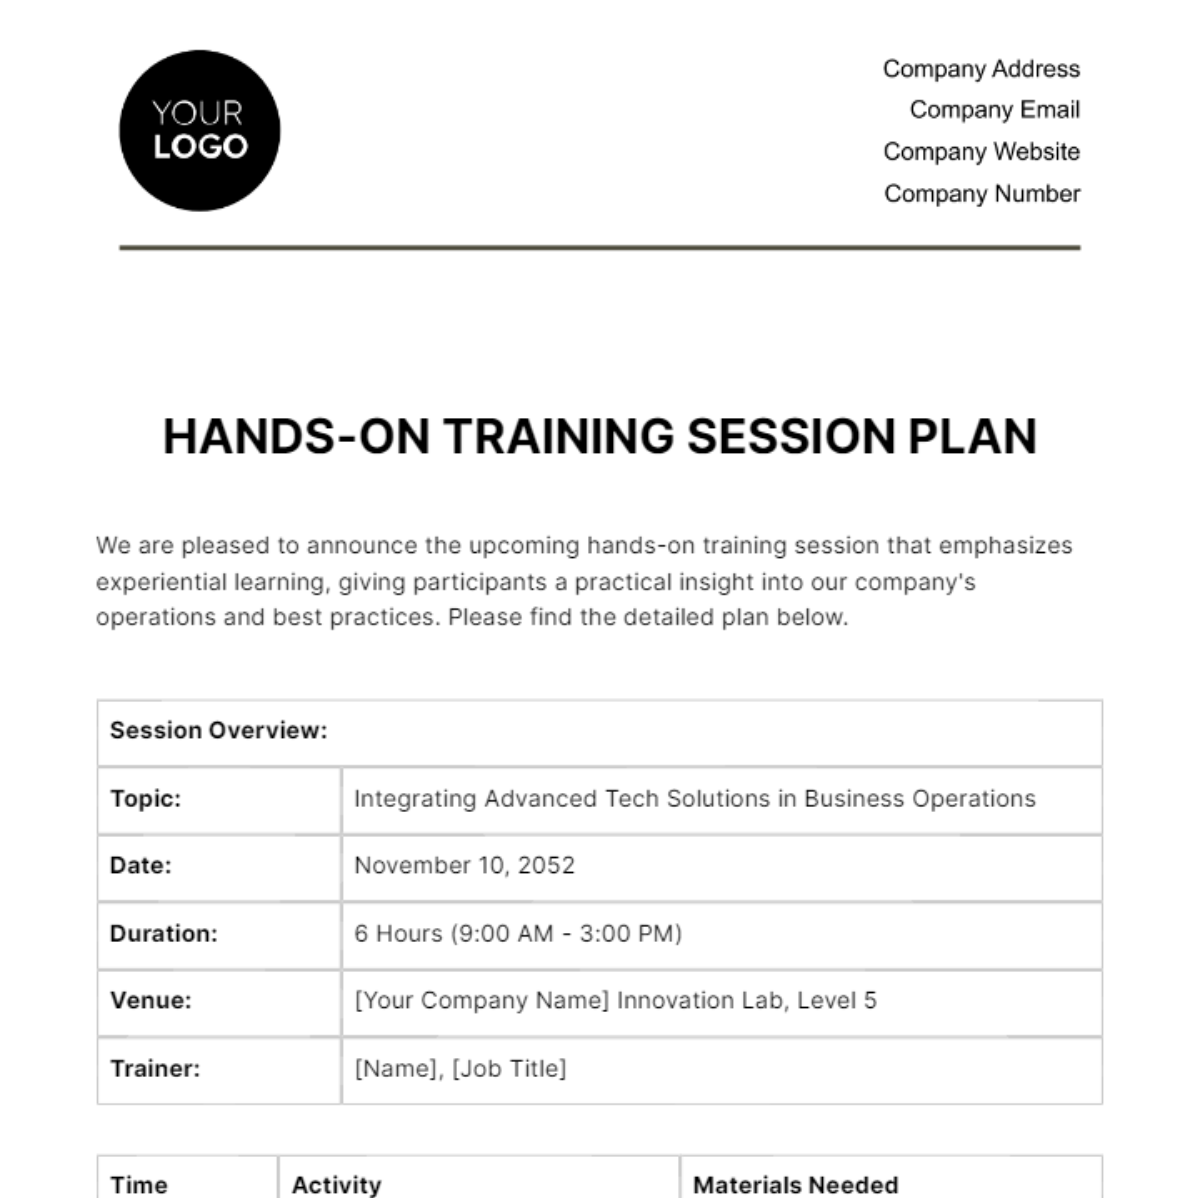 Free Hands-on Training Session Plan HR Template